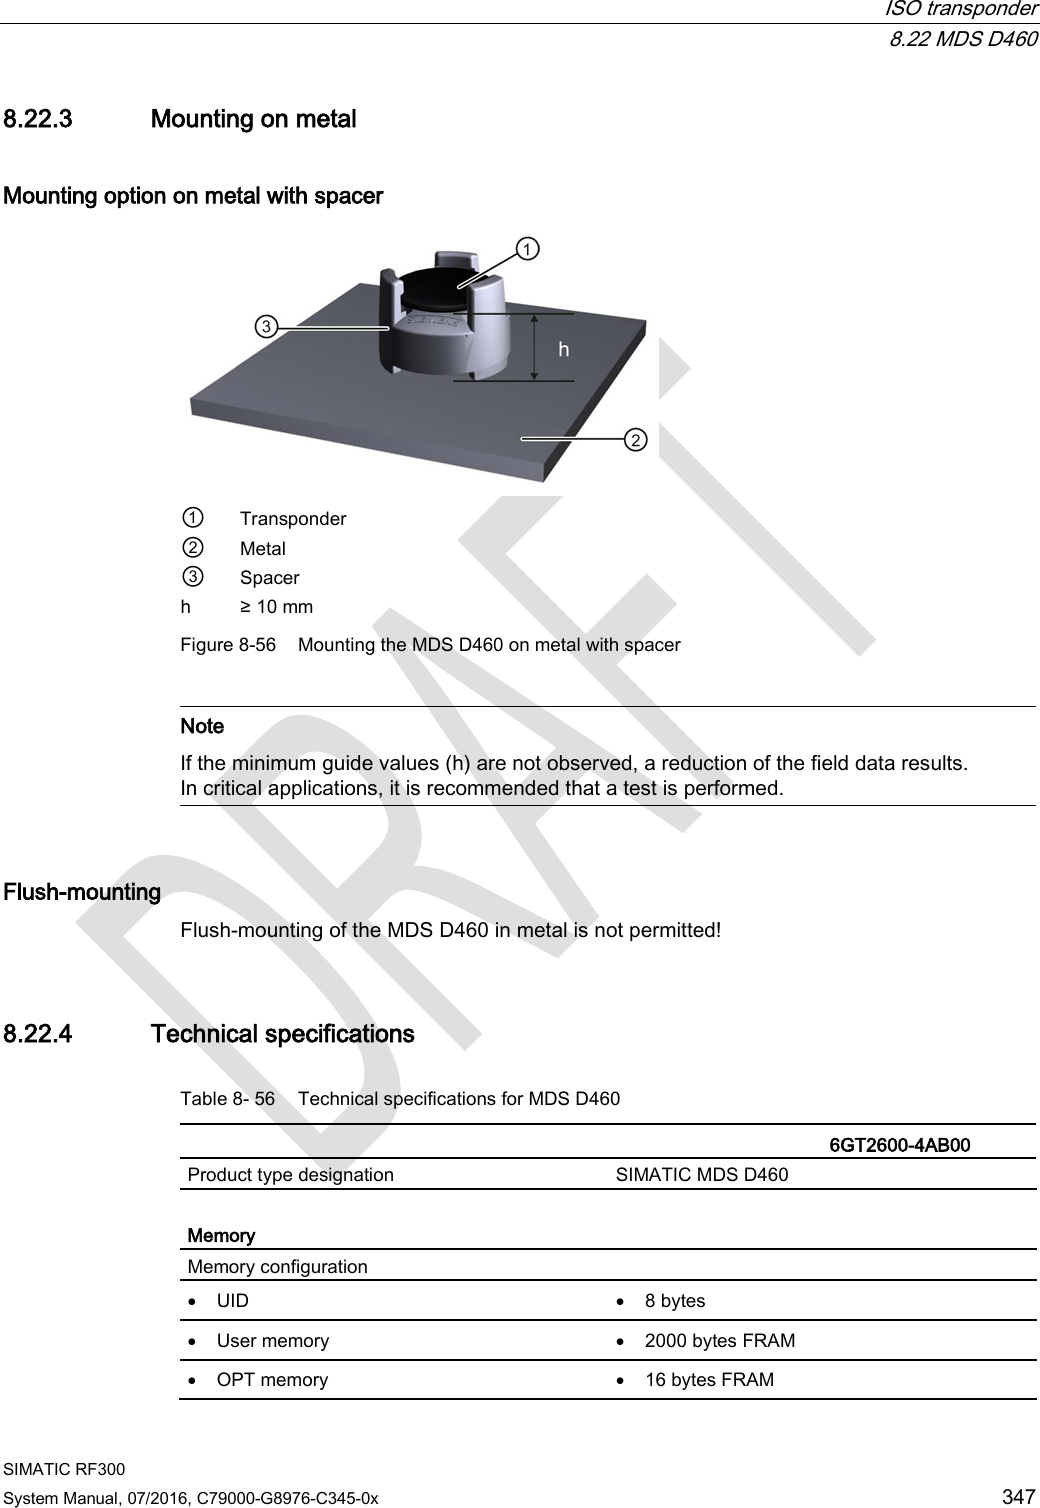  ISO transponder  8.22 MDS D460 SIMATIC RF300 System Manual, 07/2016, C79000-G8976-C345-0x 347 8.22.3 Mounting on metal Mounting option on metal with spacer  ① Transponder ② Metal ③ Spacer h ≥ 10 mm Figure 8-56 Mounting the MDS D460 on metal with spacer   Note If the minimum guide values (h) are not observed, a reduction of the field data results. In critical applications, it is recommended that a test is performed.  Flush-mounting Flush-mounting of the MDS D460 in metal is not permitted! 8.22.4 Technical specifications Table 8- 56 Technical specifications for MDS D460    6GT2600-4AB00 Product type designation SIMATIC MDS D460  Memory Memory configuration  • UID • 8 bytes • User memory • 2000 bytes FRAM • OPT memory • 16 bytes FRAM 